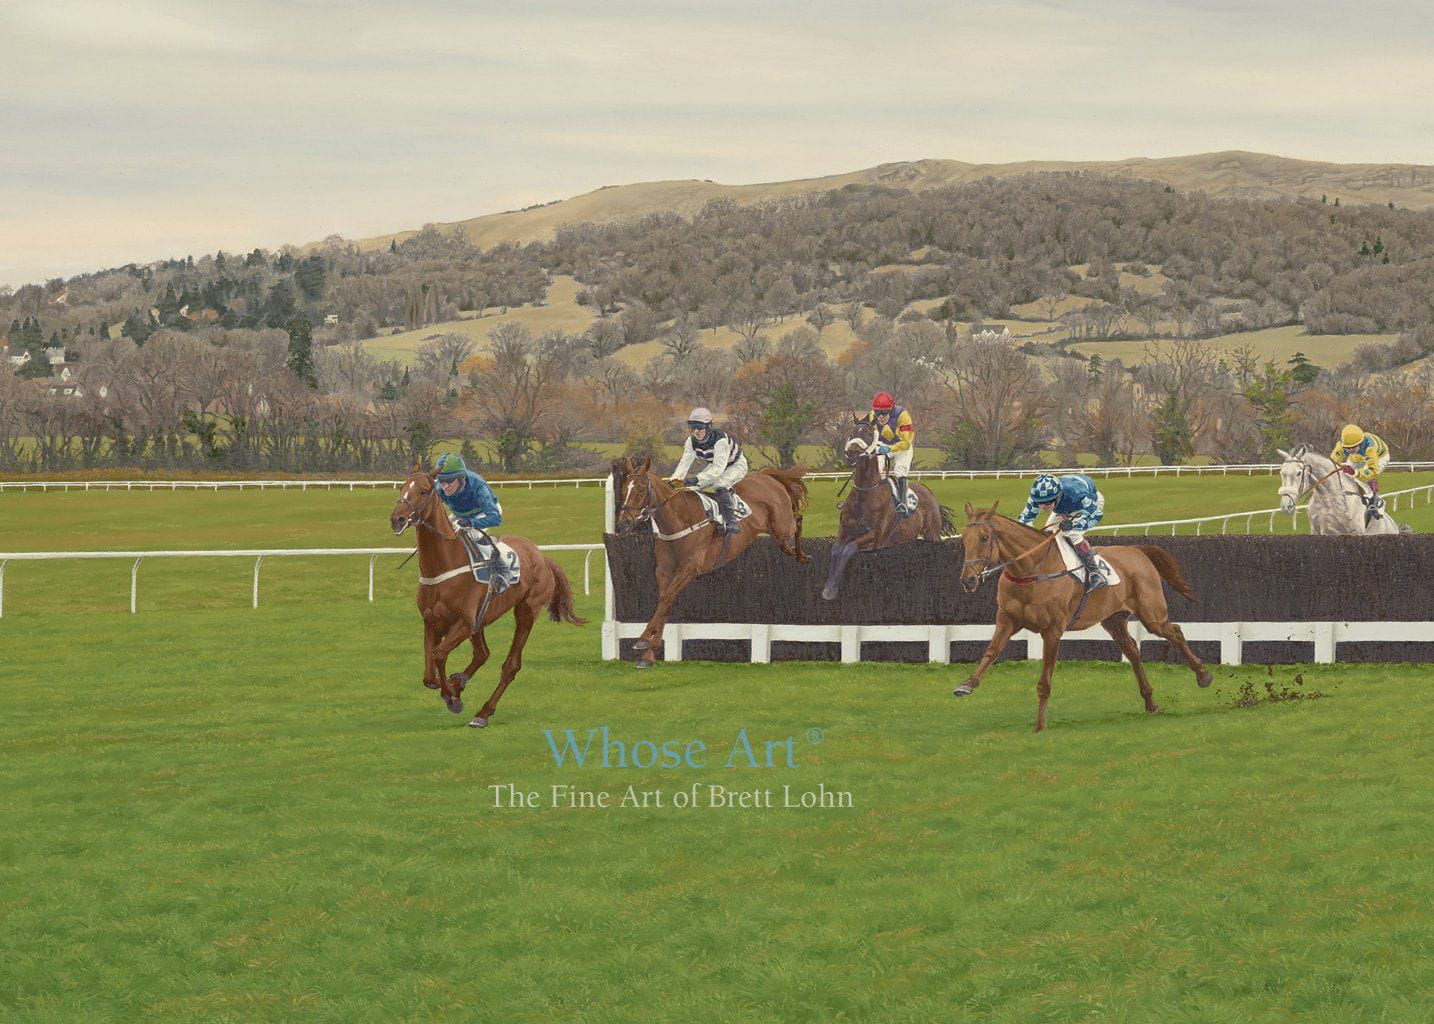 Cheltenham Racecourse Art Card featuring a painting of horses jumping a fence at Cheltenham with Cleeve Hill nearby